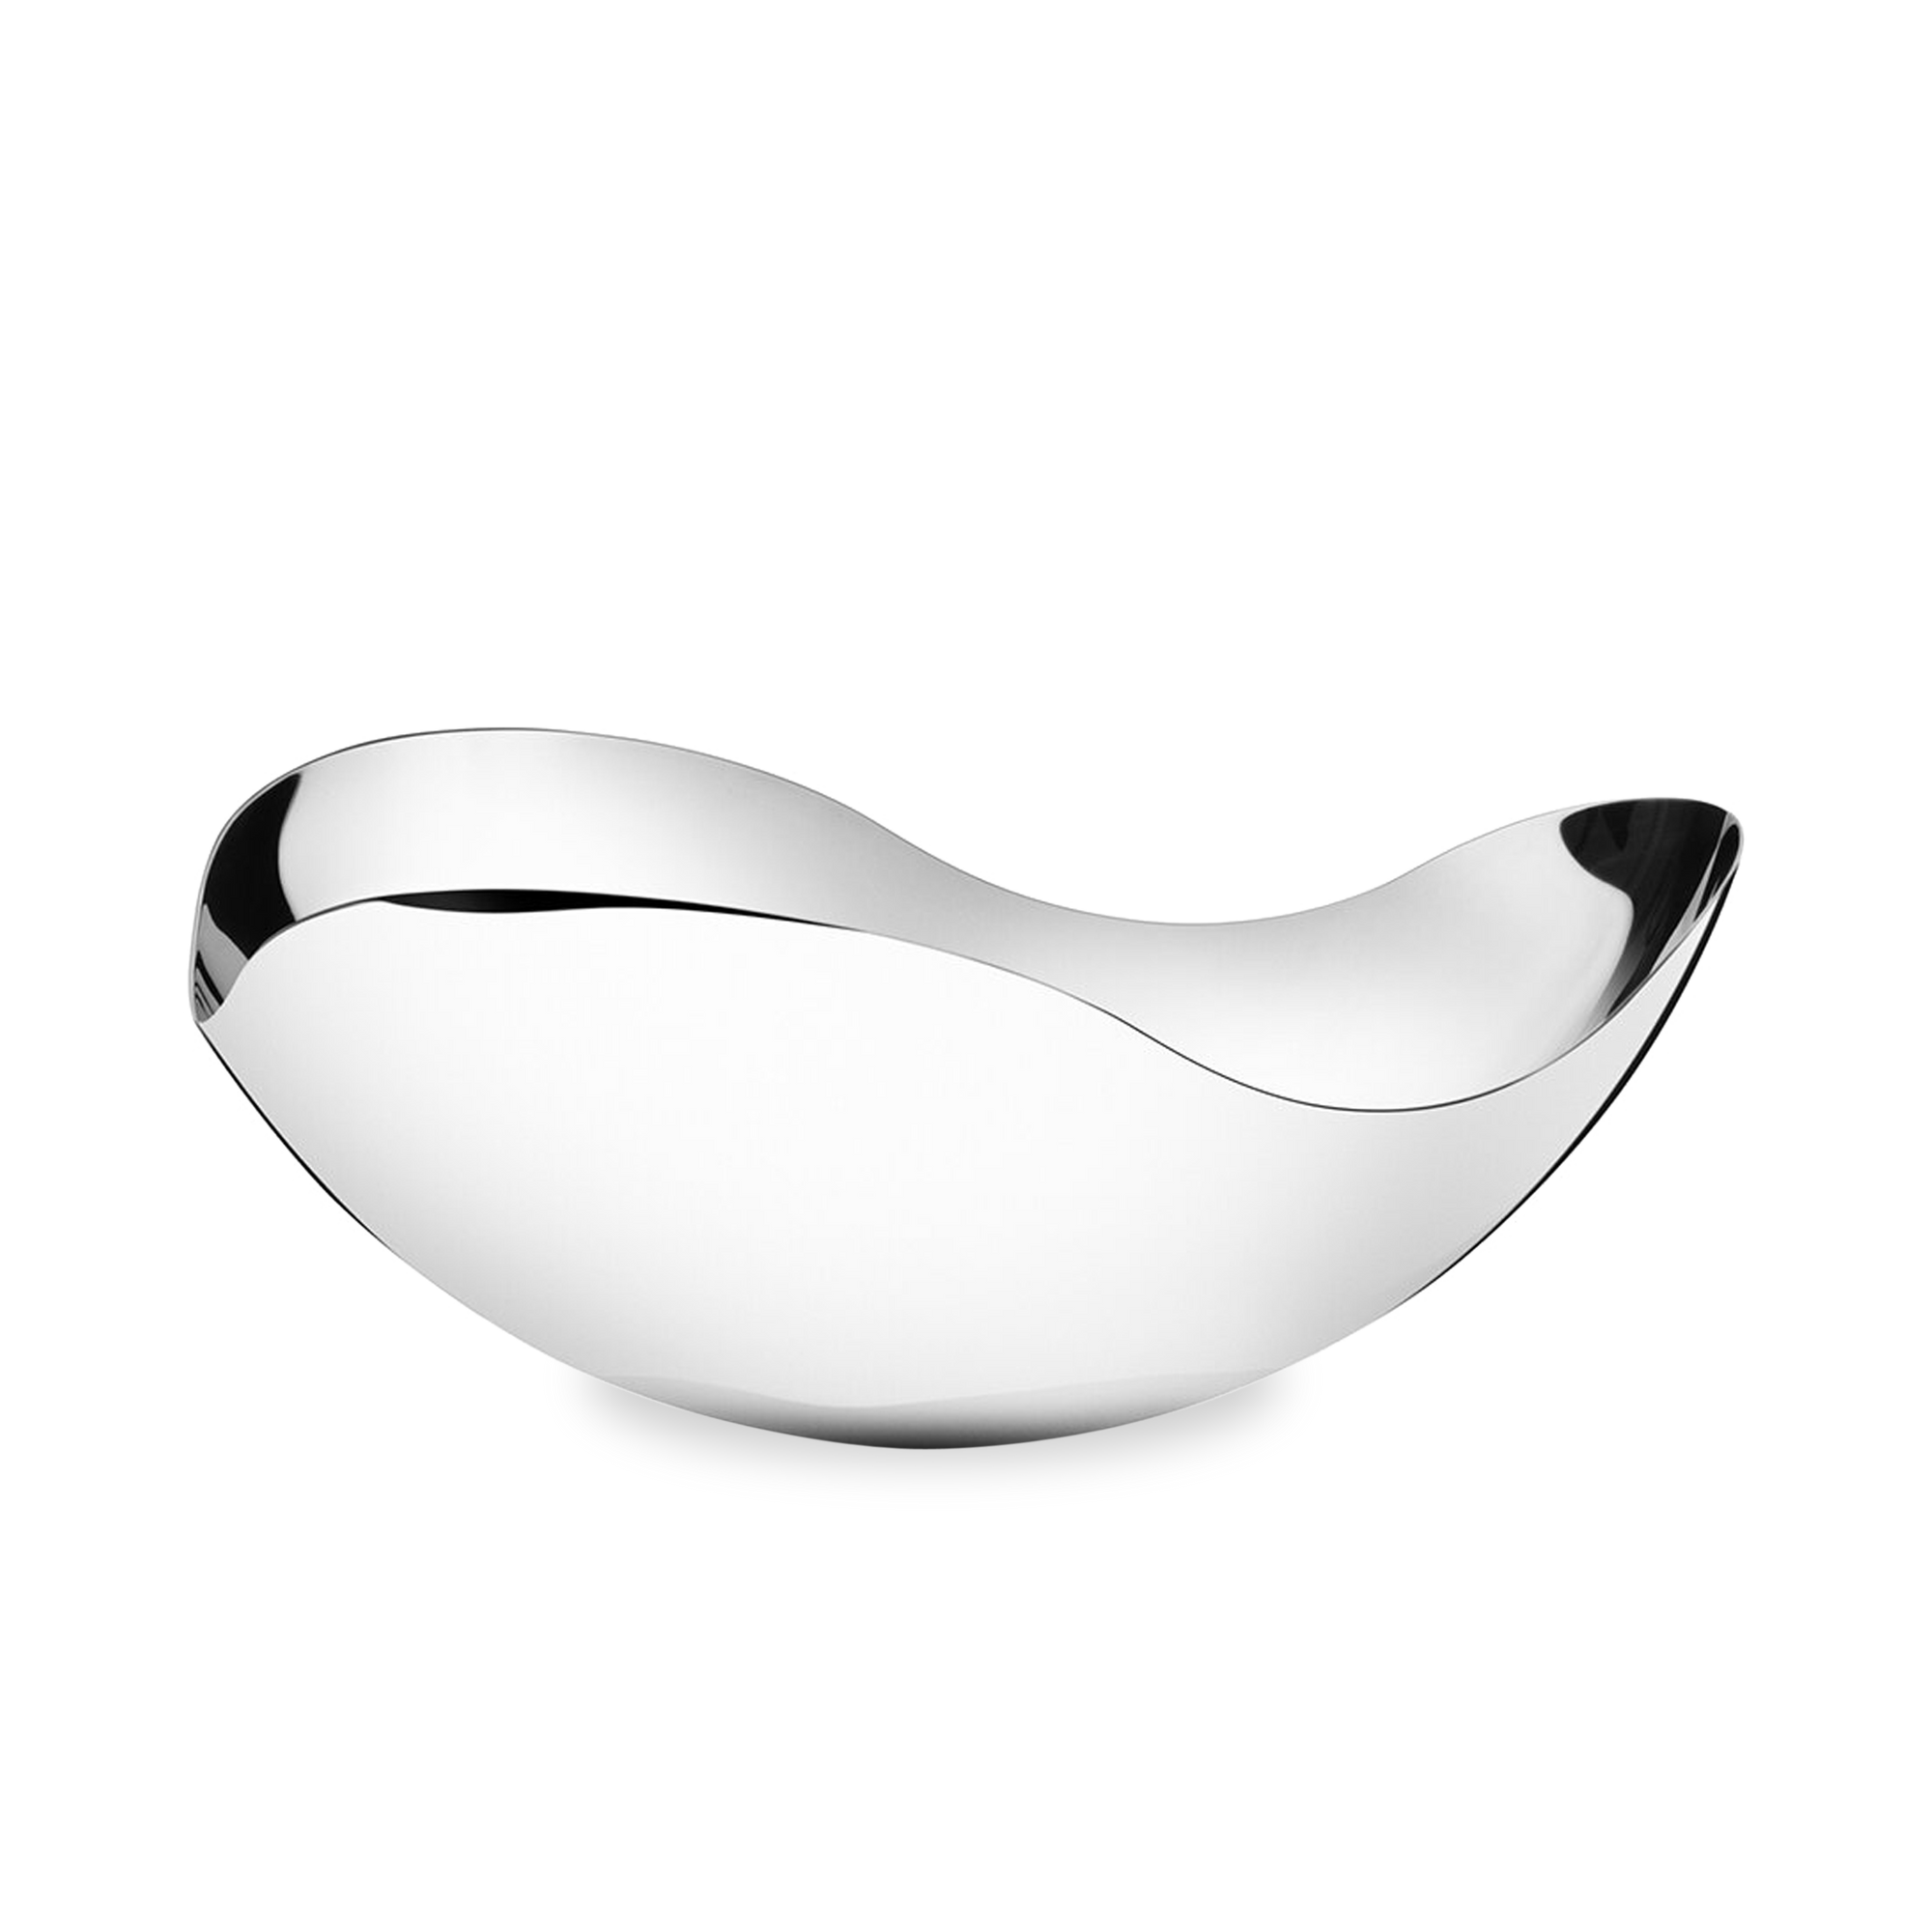 The Bloom Bowl's shape is inspired by the gently curved petals of cherry blossom.